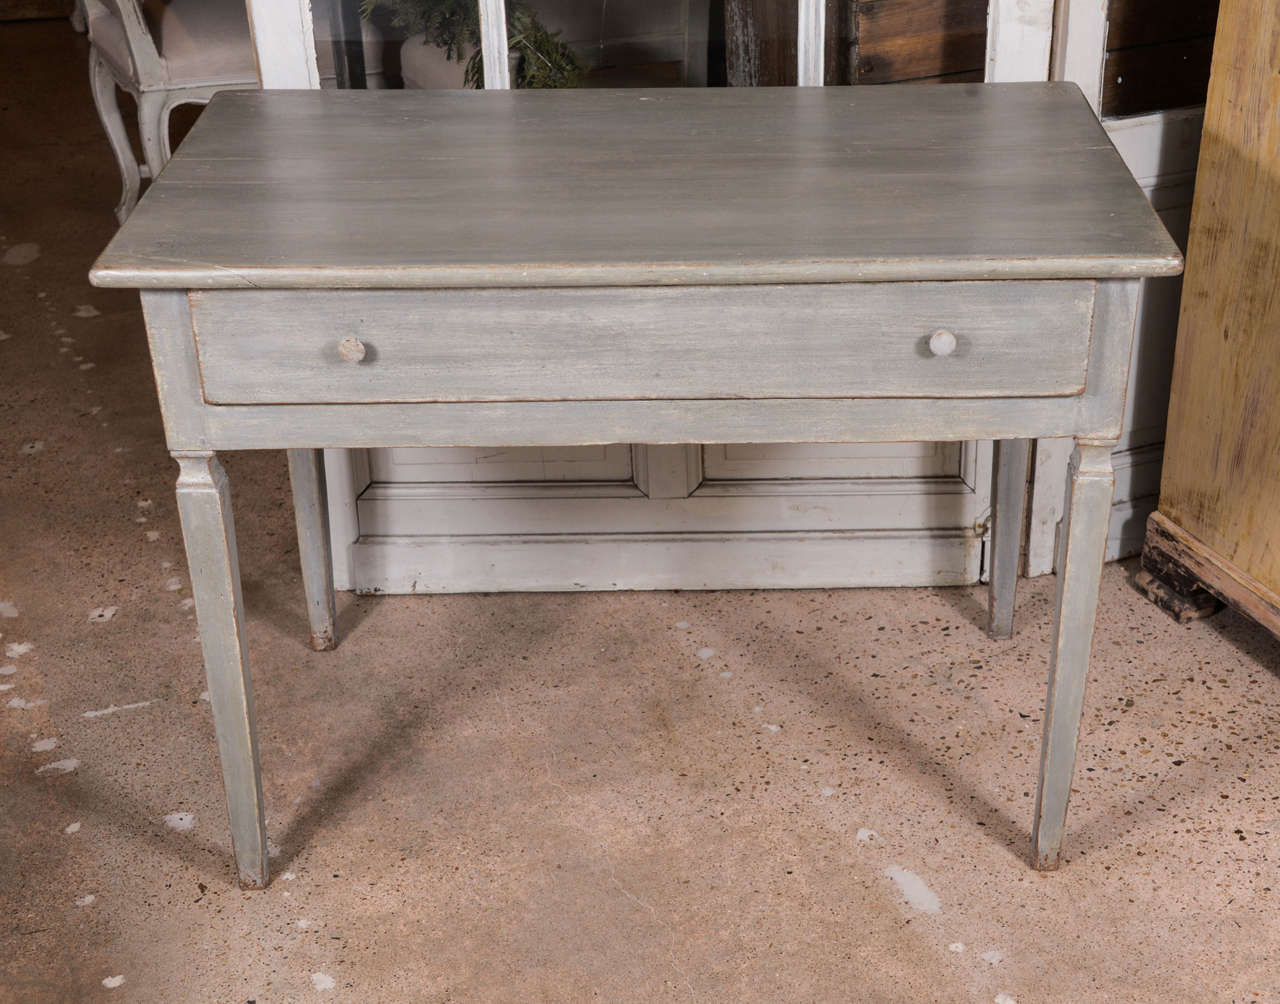 Walnut single drawer table (transitional Louis XV/XVI) with later paint, from Northern Italy.